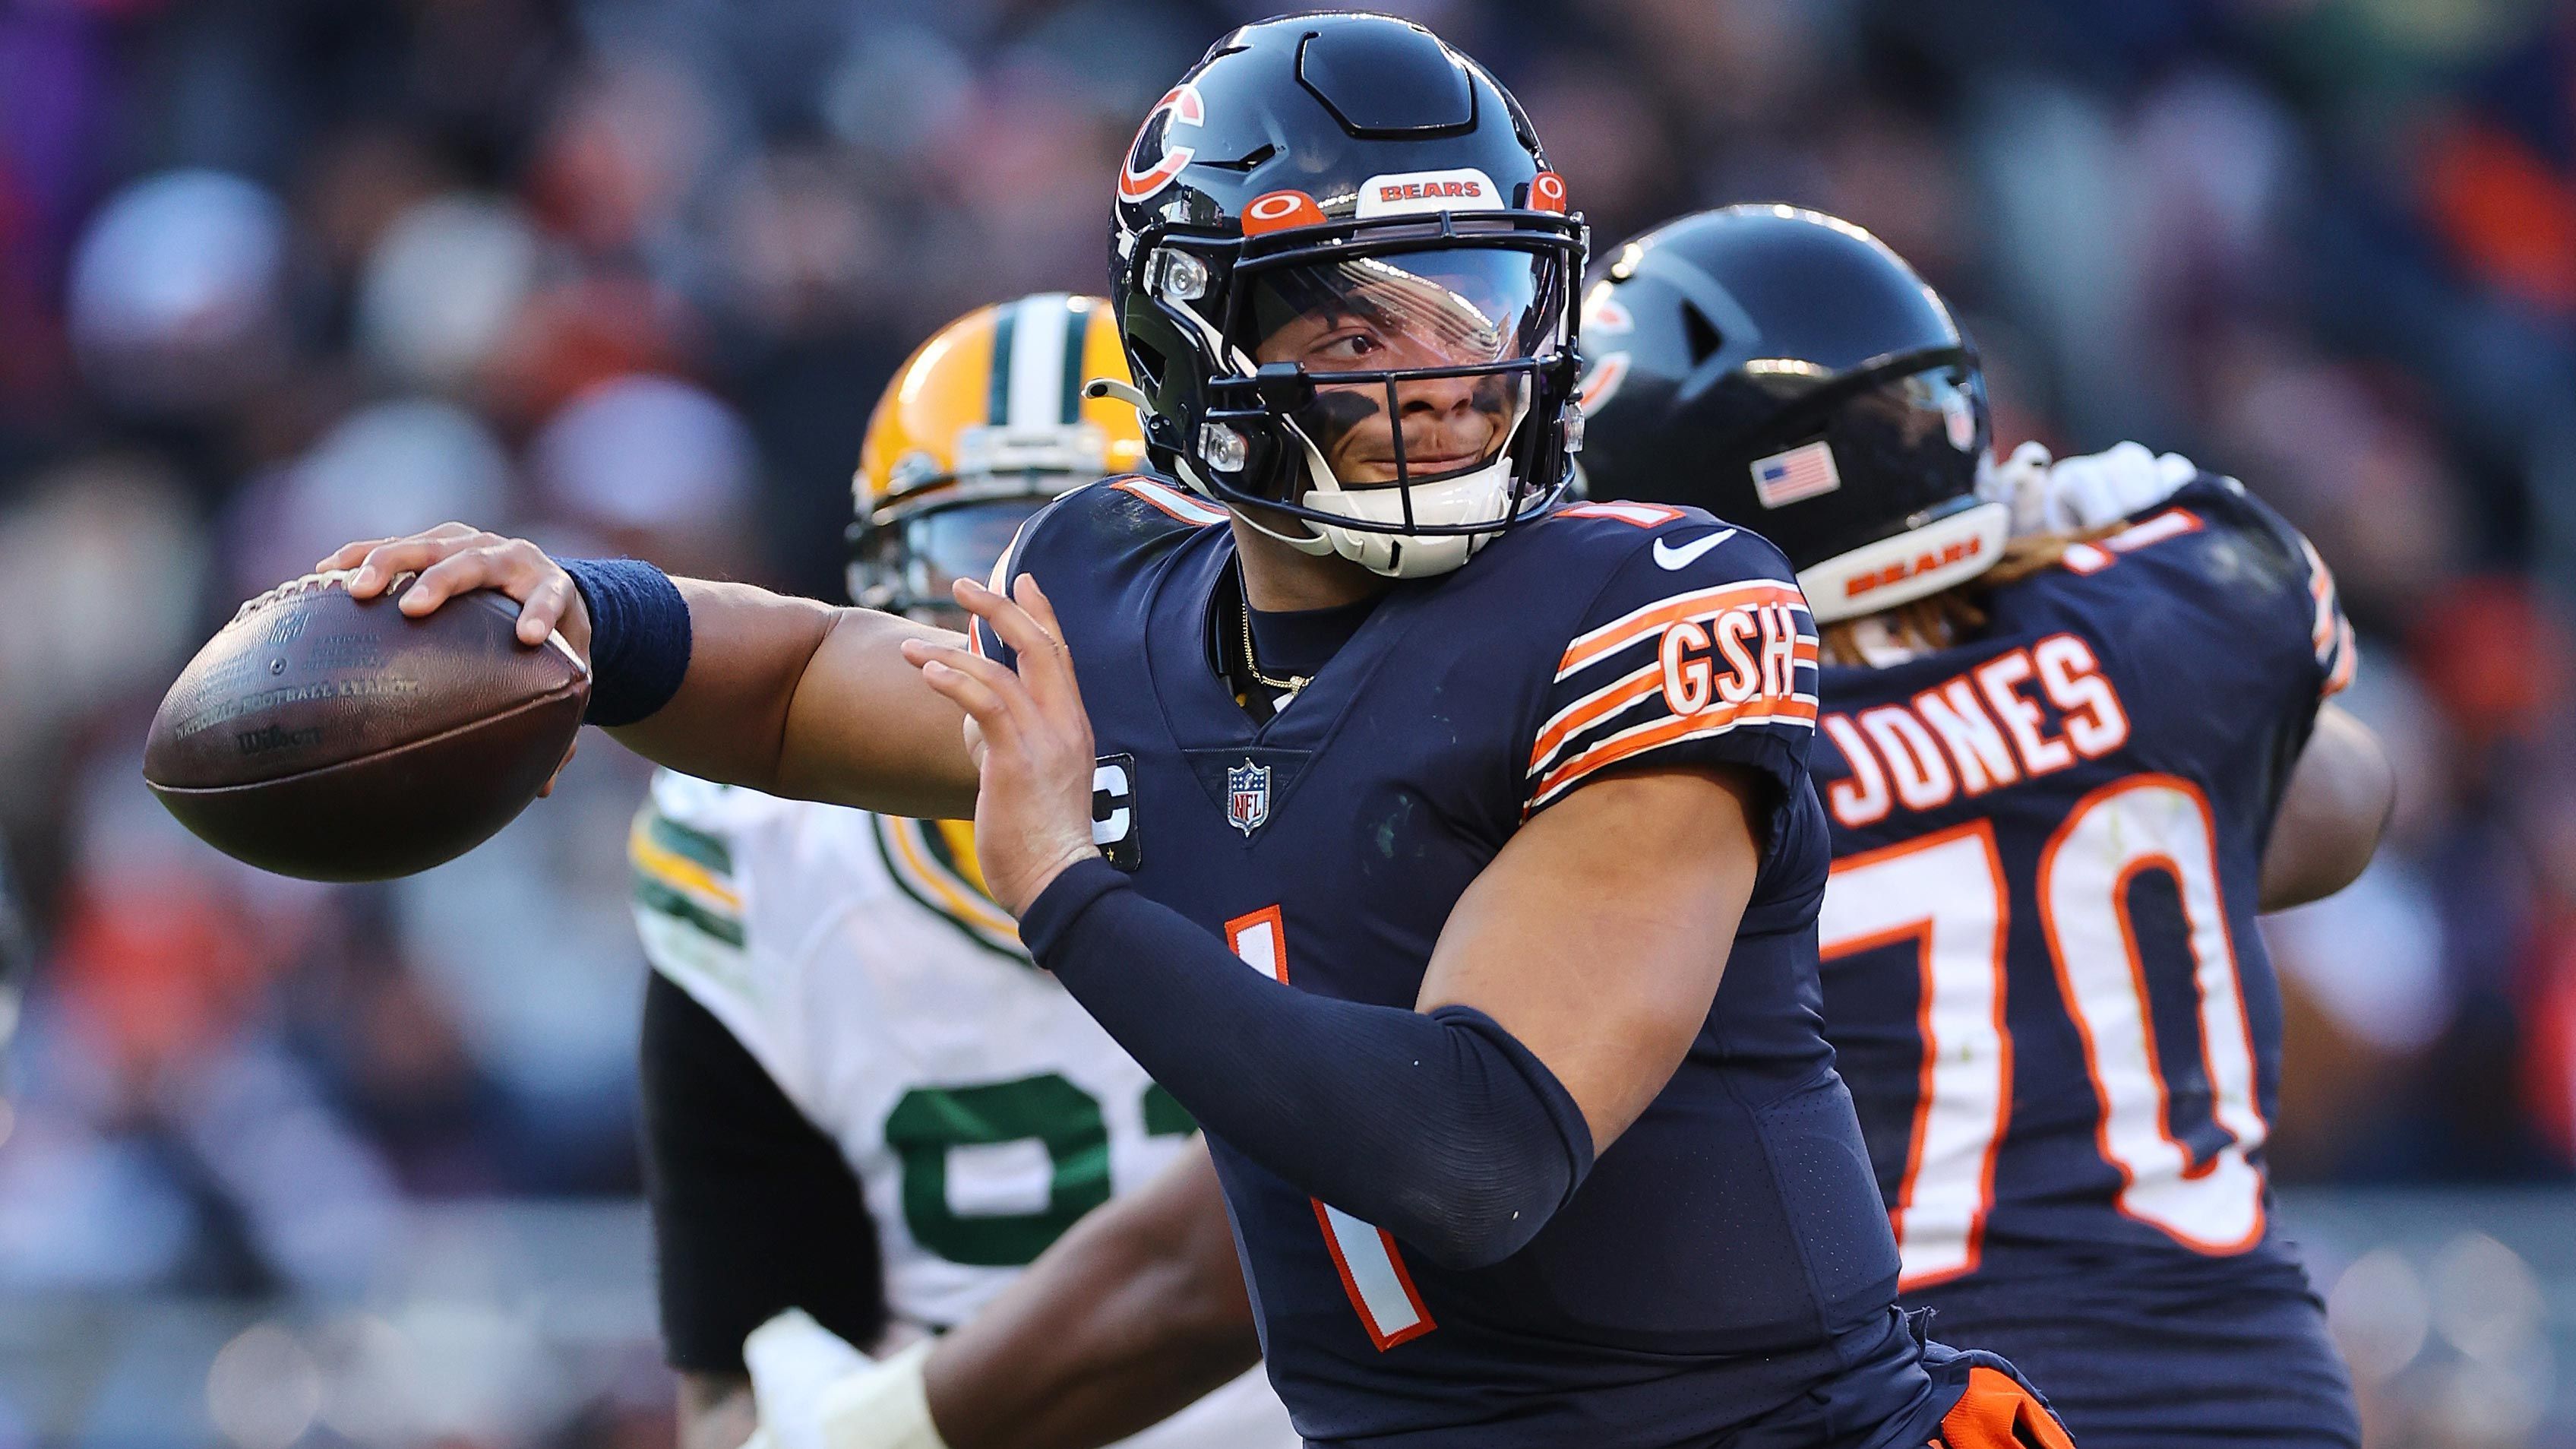 
                <strong>Acht Picks: Chicago Bears</strong><br>
                &#x2022; Runde 1<br>&#x2022; Runde 2 (via Baltimore Ravens)<br>&#x2022; Runde 3<br>&#x2022; Runde 4<br>&#x2022; Runde 4 (via Philadelphia Eagles)<br>&#x2022; Runde 5<br>&#x2022; Runde 5 (via Baltimore Ravens)<br>&#x2022; Runde 7 <br>
              